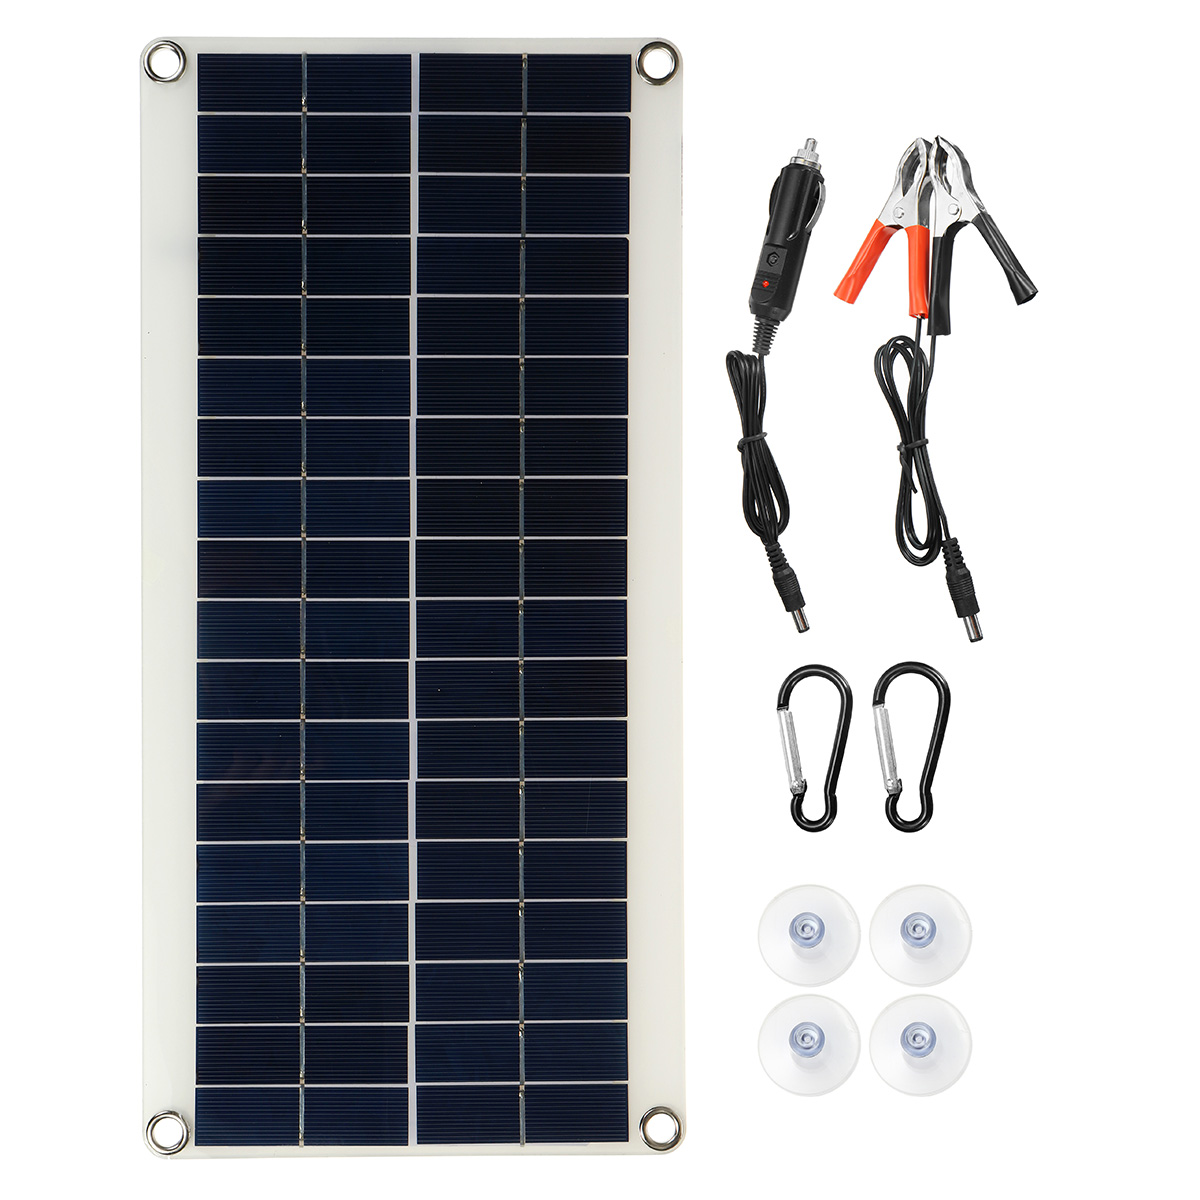 

JH-10 18V/5V Monocrystalline Solar Panel Battery Charger Dual USB Interface with Cables